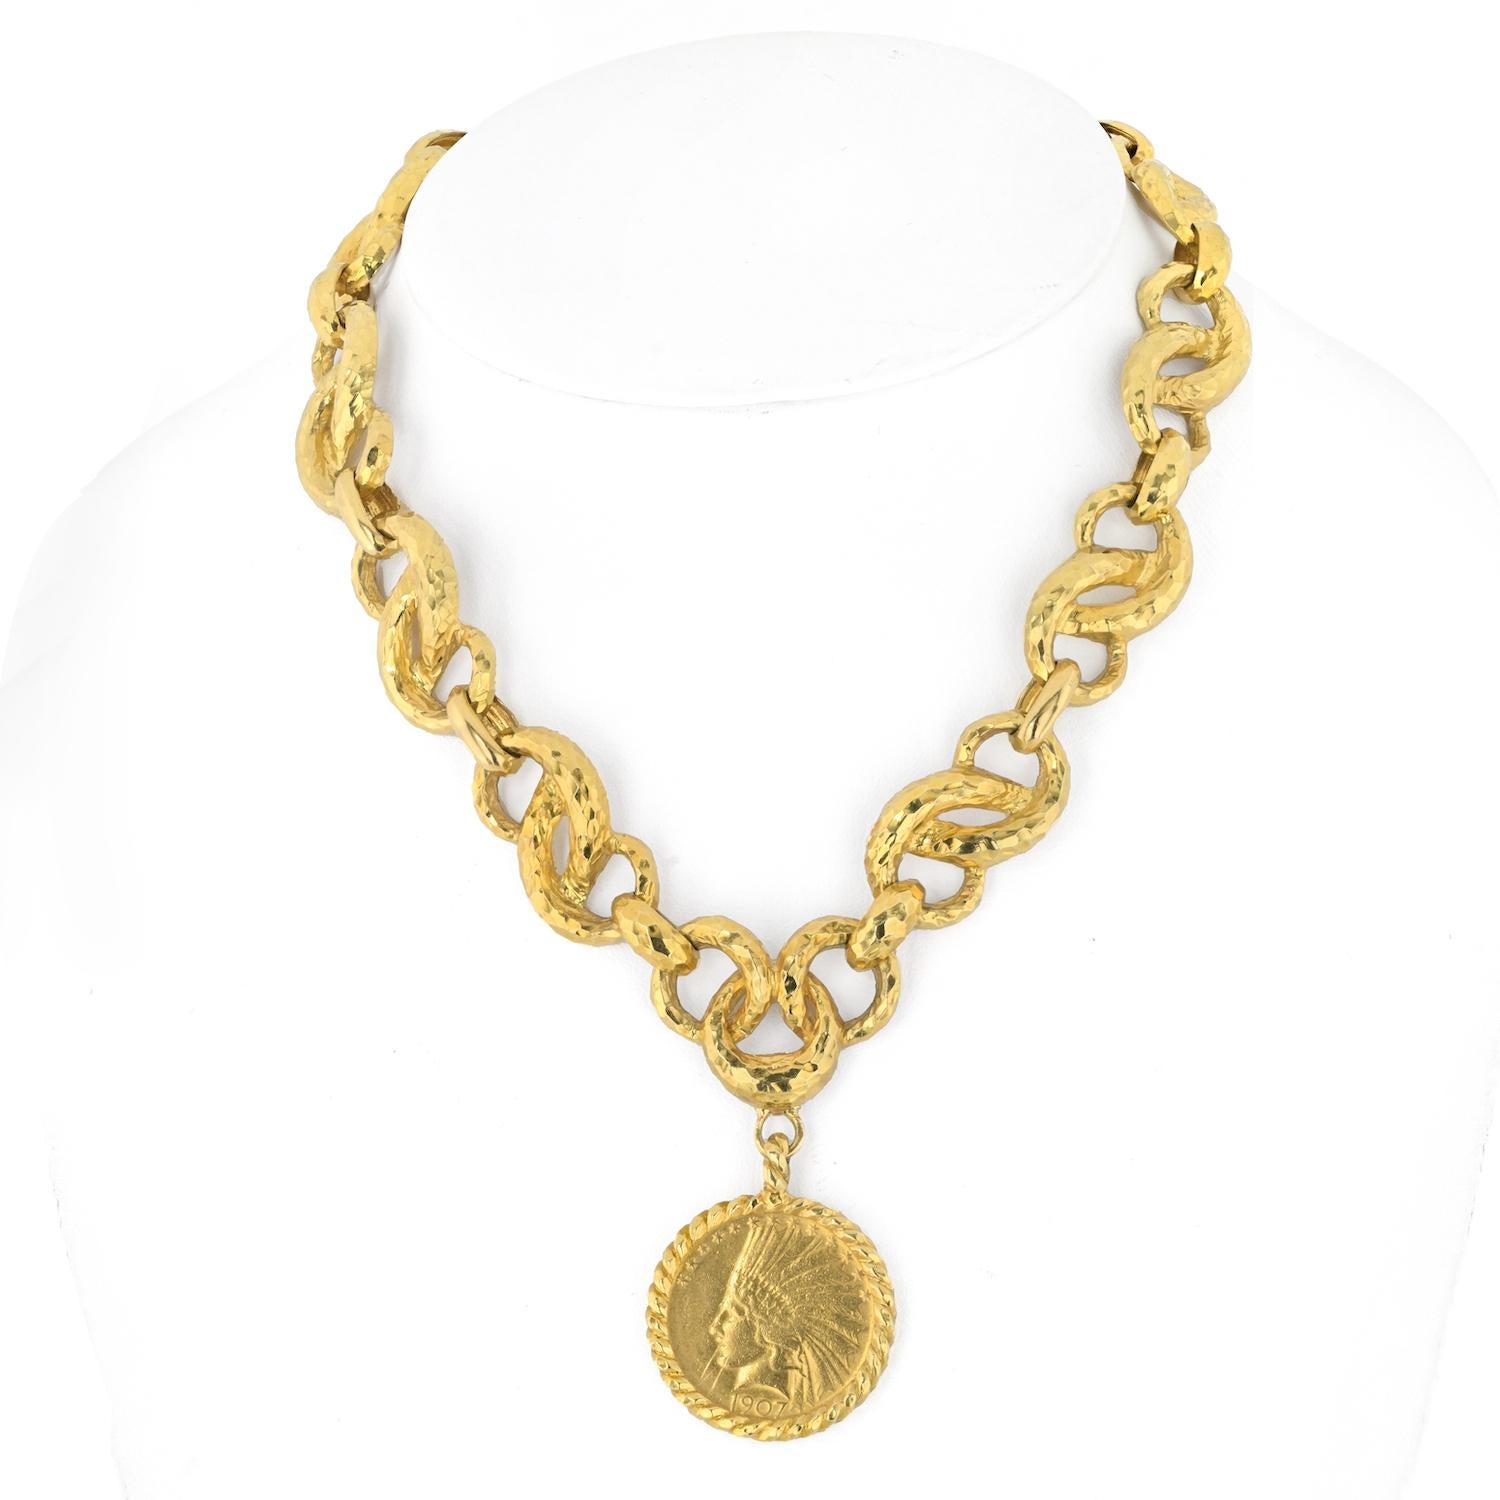 Elevate your style with this exquisite David Webb 18K Yellow Gold Hammered Chain 